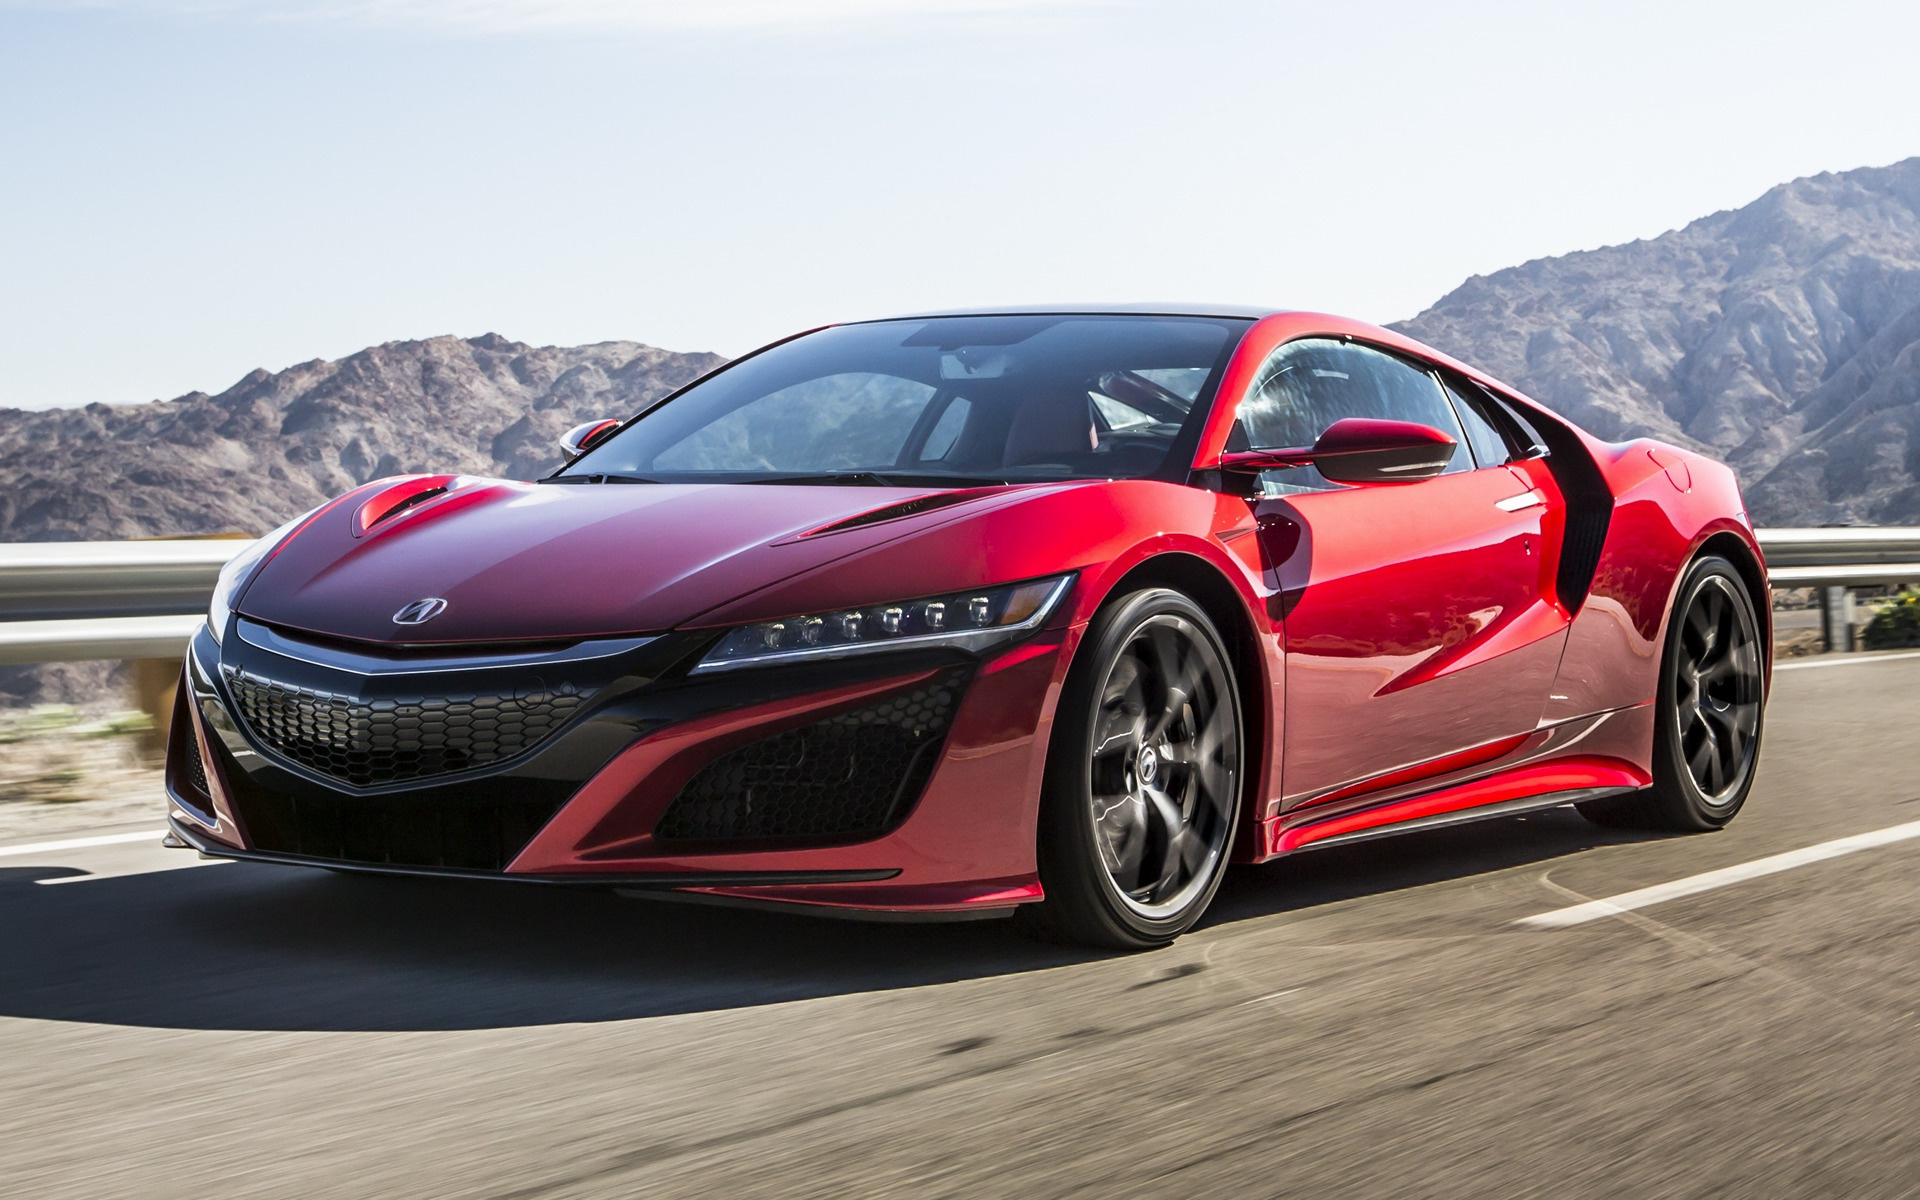 2017 Acura NSX - Wallpapers and HD Images | Car Pixel